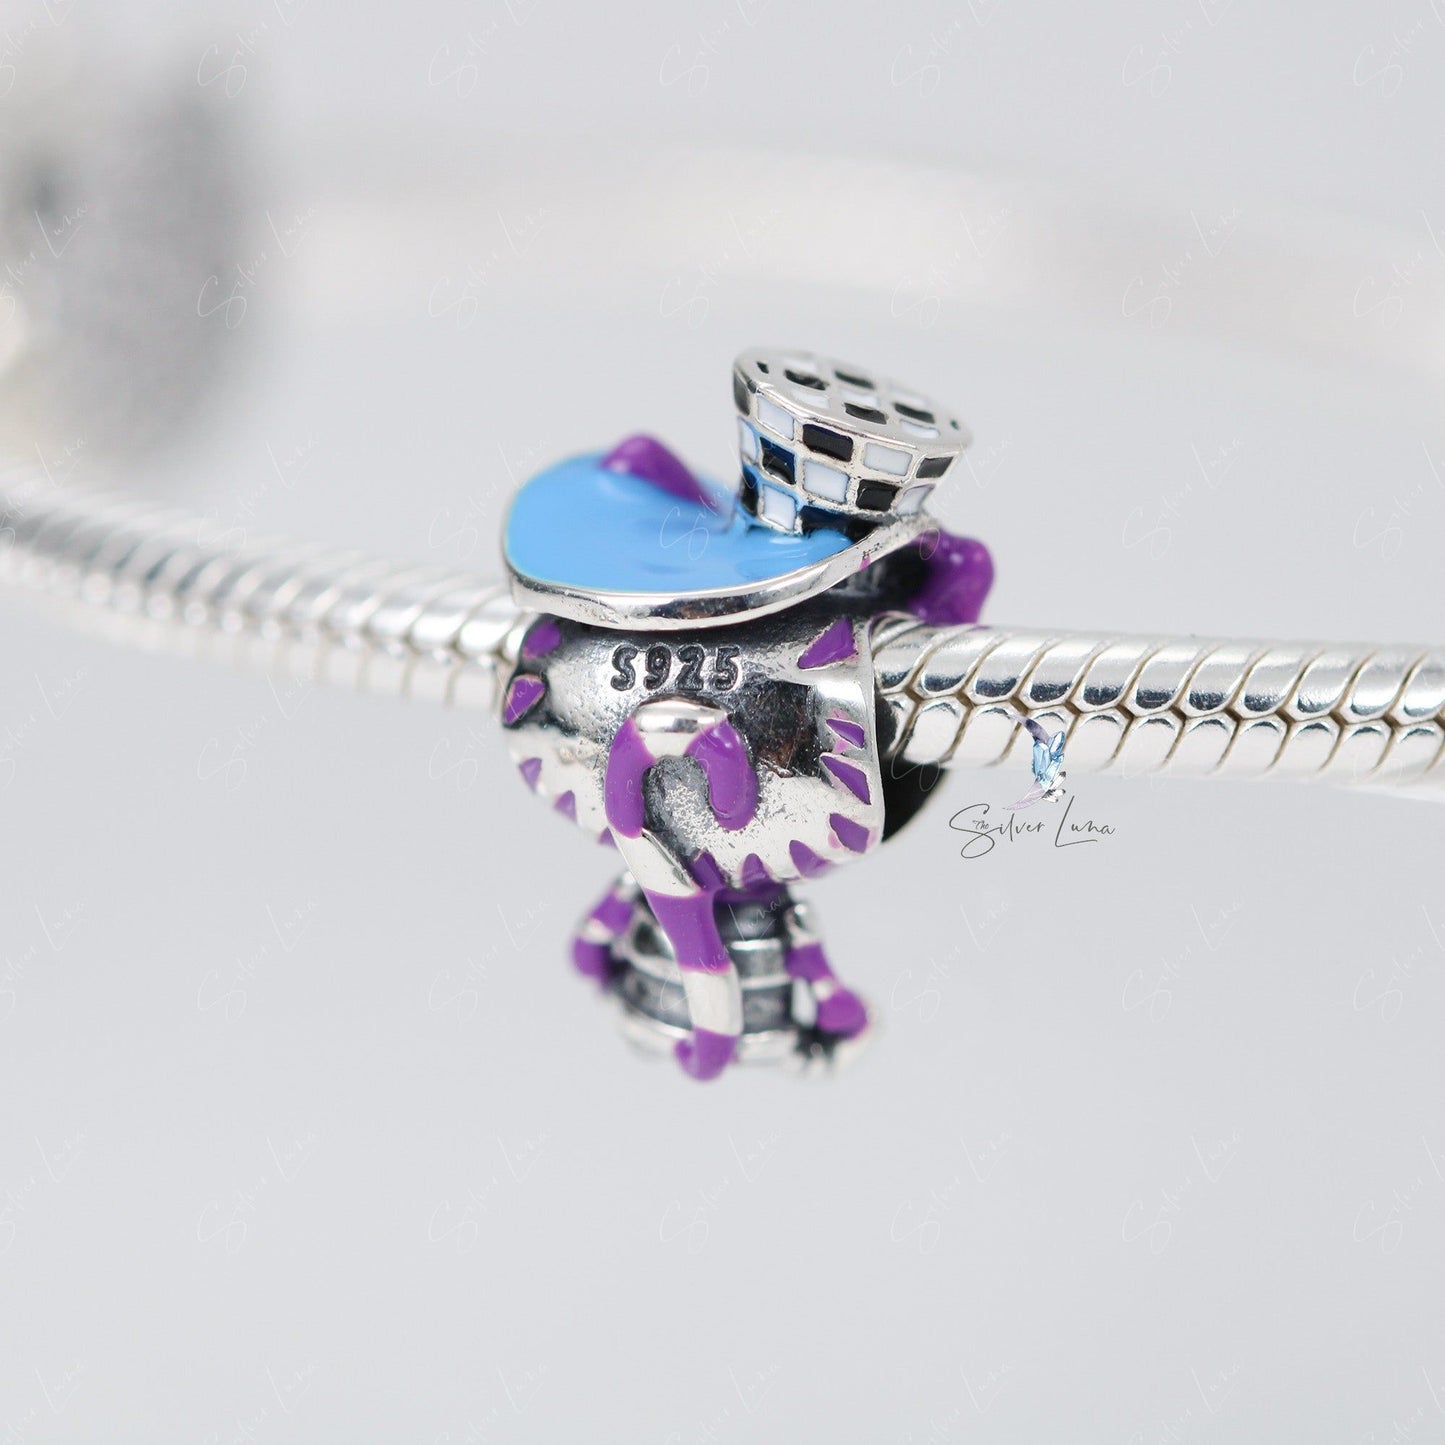 The Cheshire Cat silver charm for bracelet